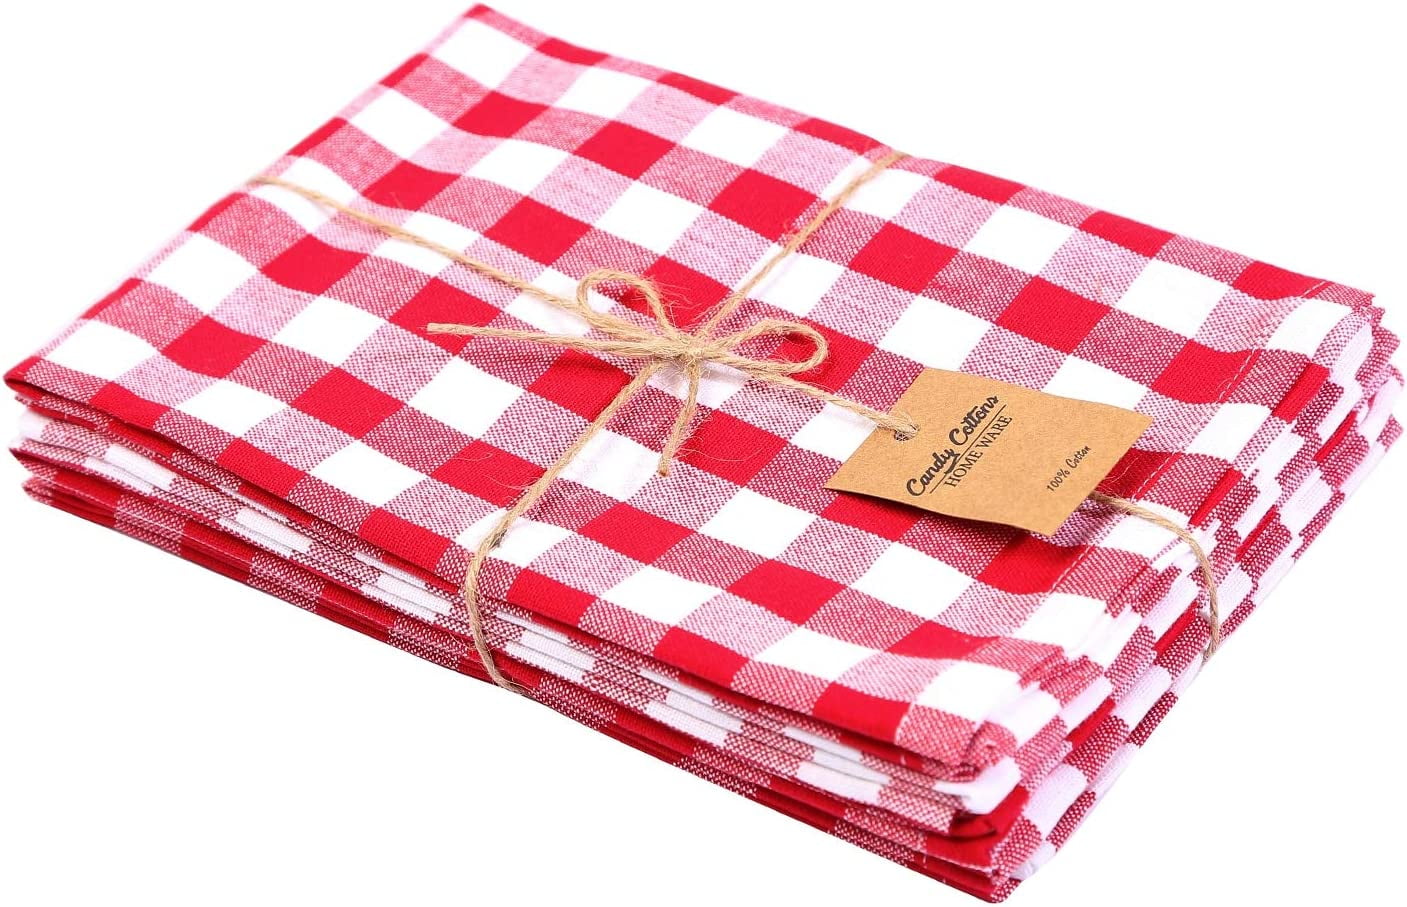 ACCENTHOME Natural Cotton Linen Napkin Set of 12 18x18 inch Dinner Napkins  - Washable Soft Premium Hotel Quality Reusable Napkins Perfect Table